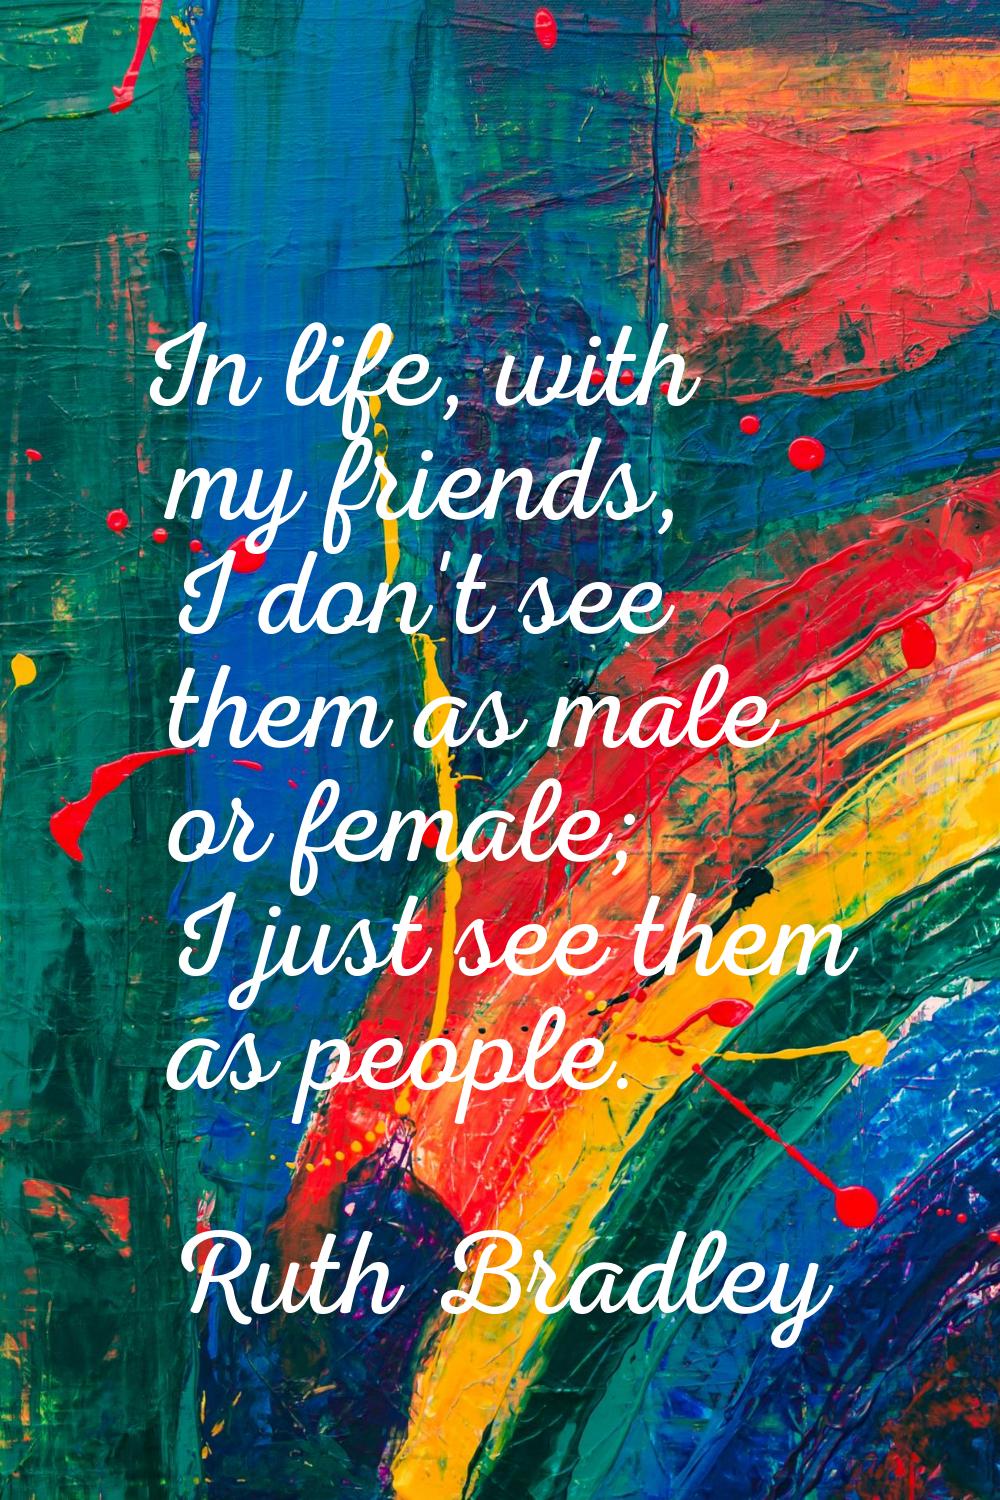 In life, with my friends, I don't see them as male or female; I just see them as people.